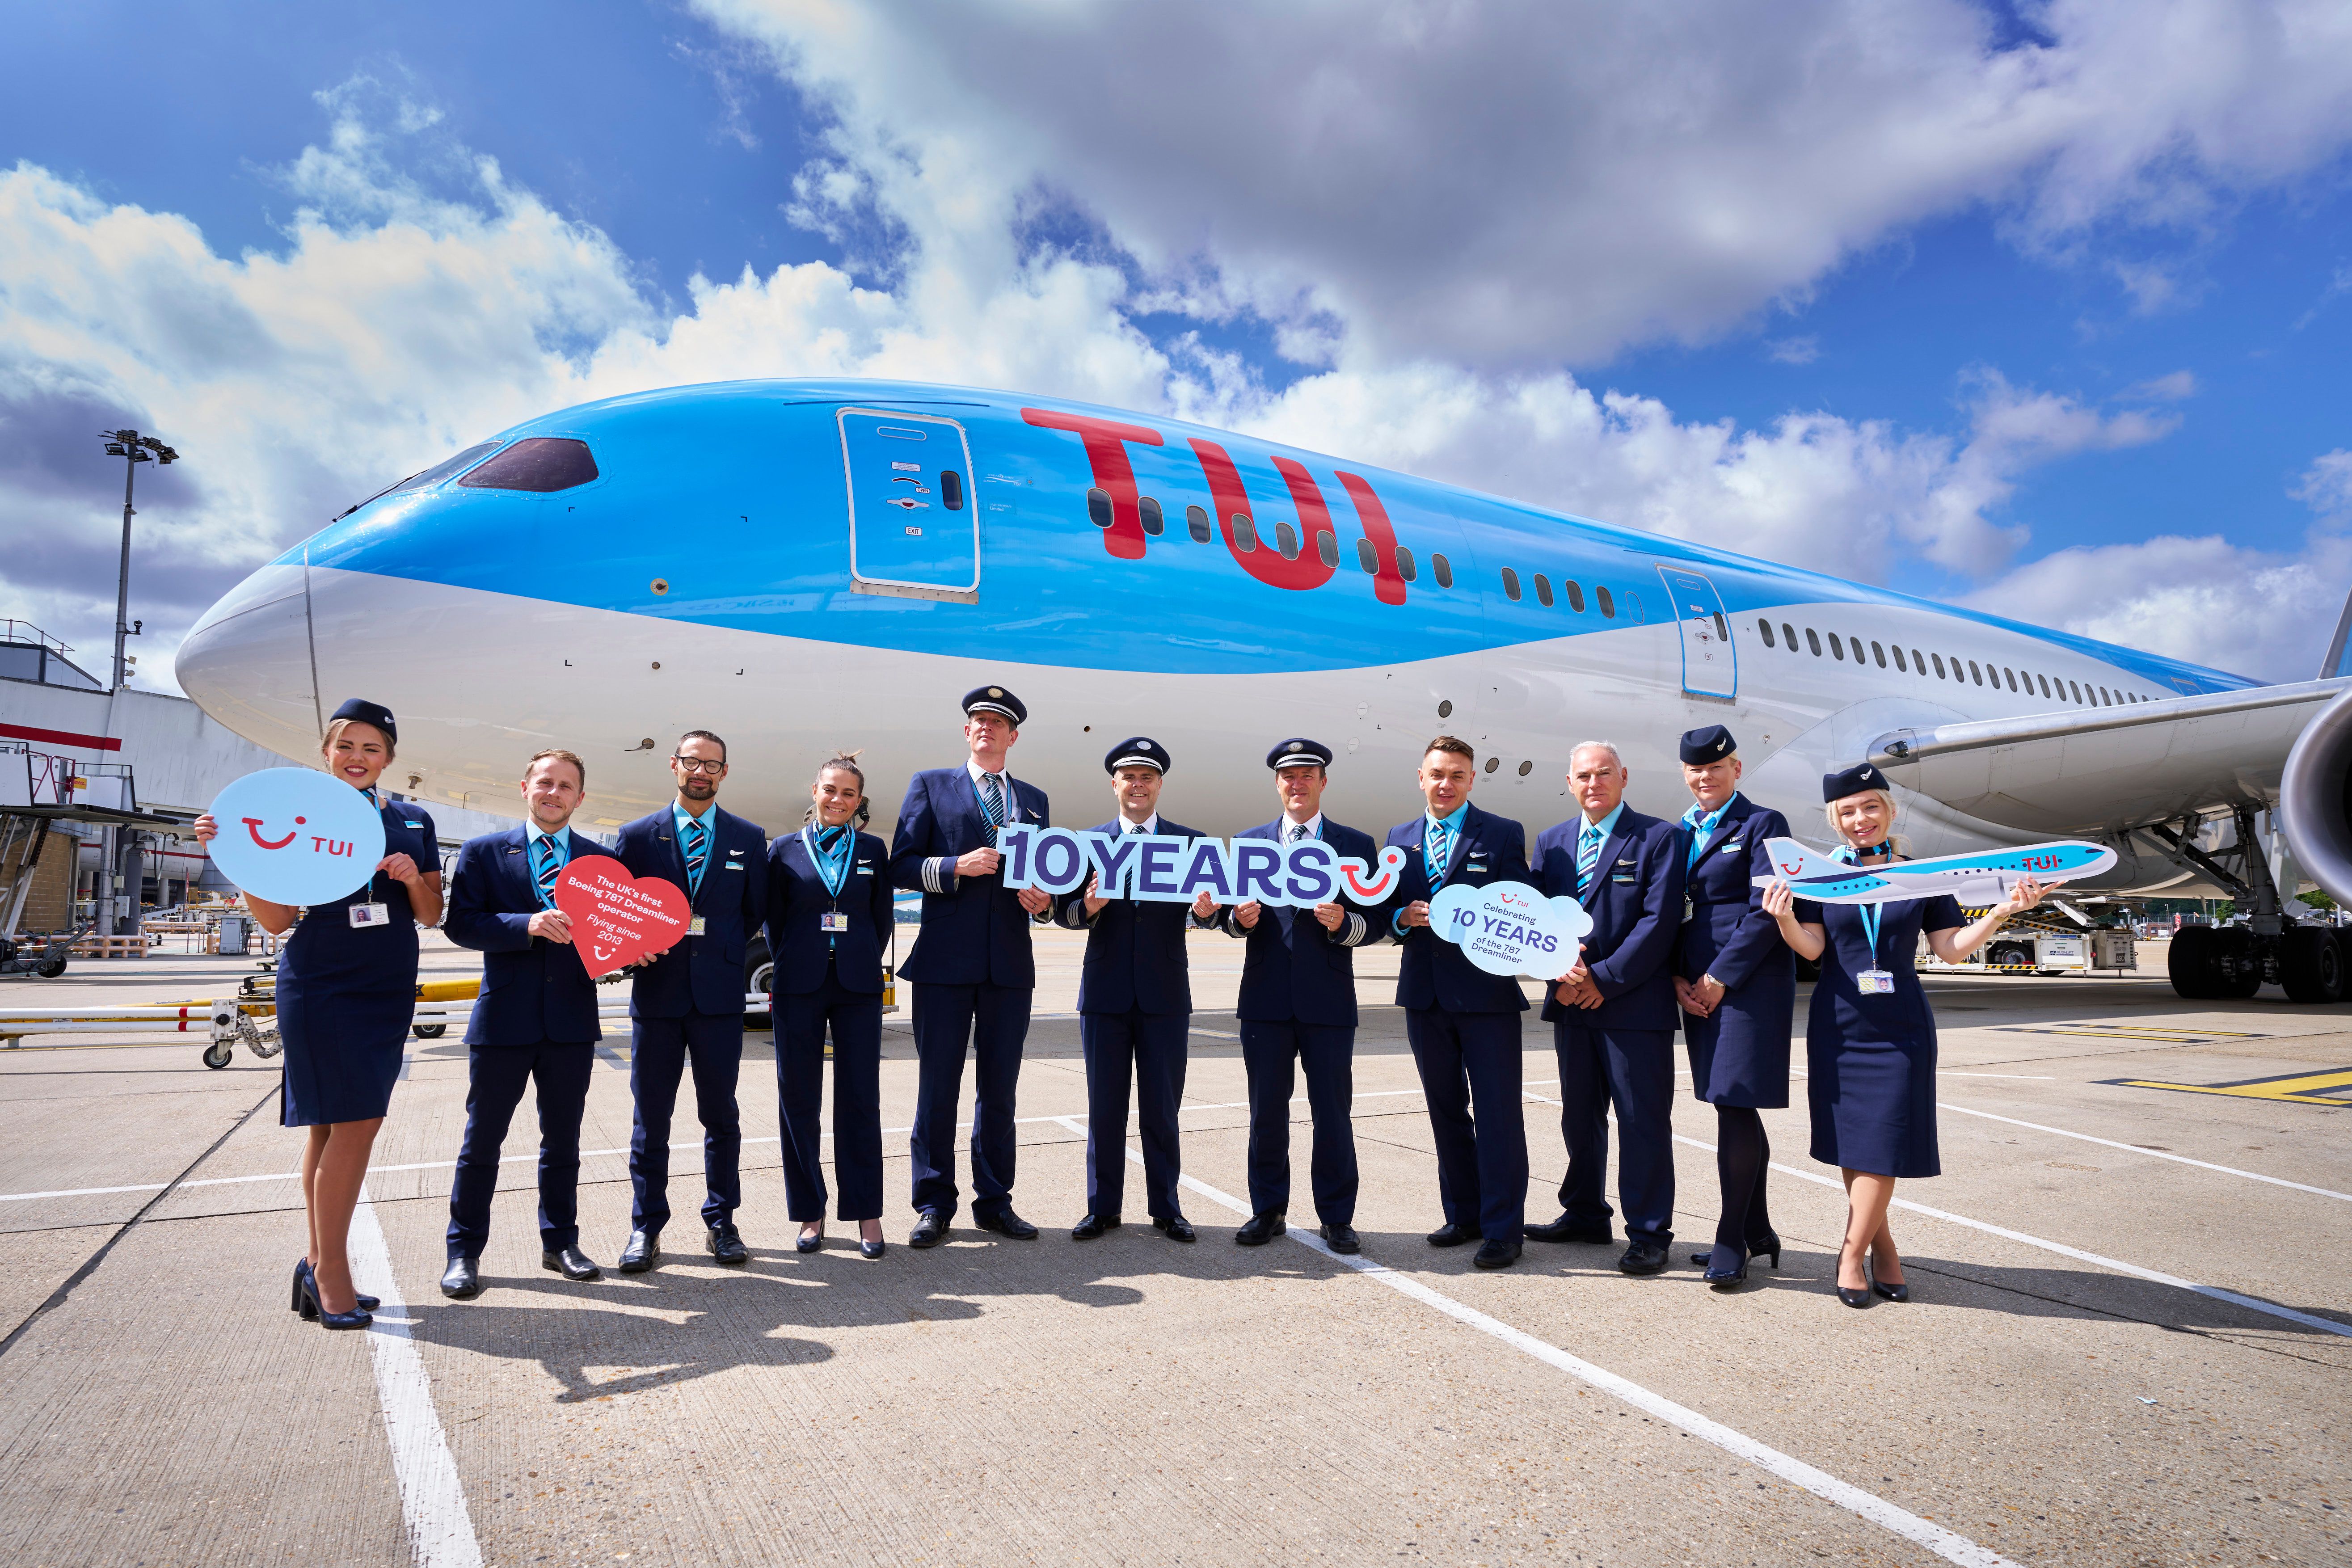 TUI celebrating 10 years of its Boeing 787 Dreamliner service